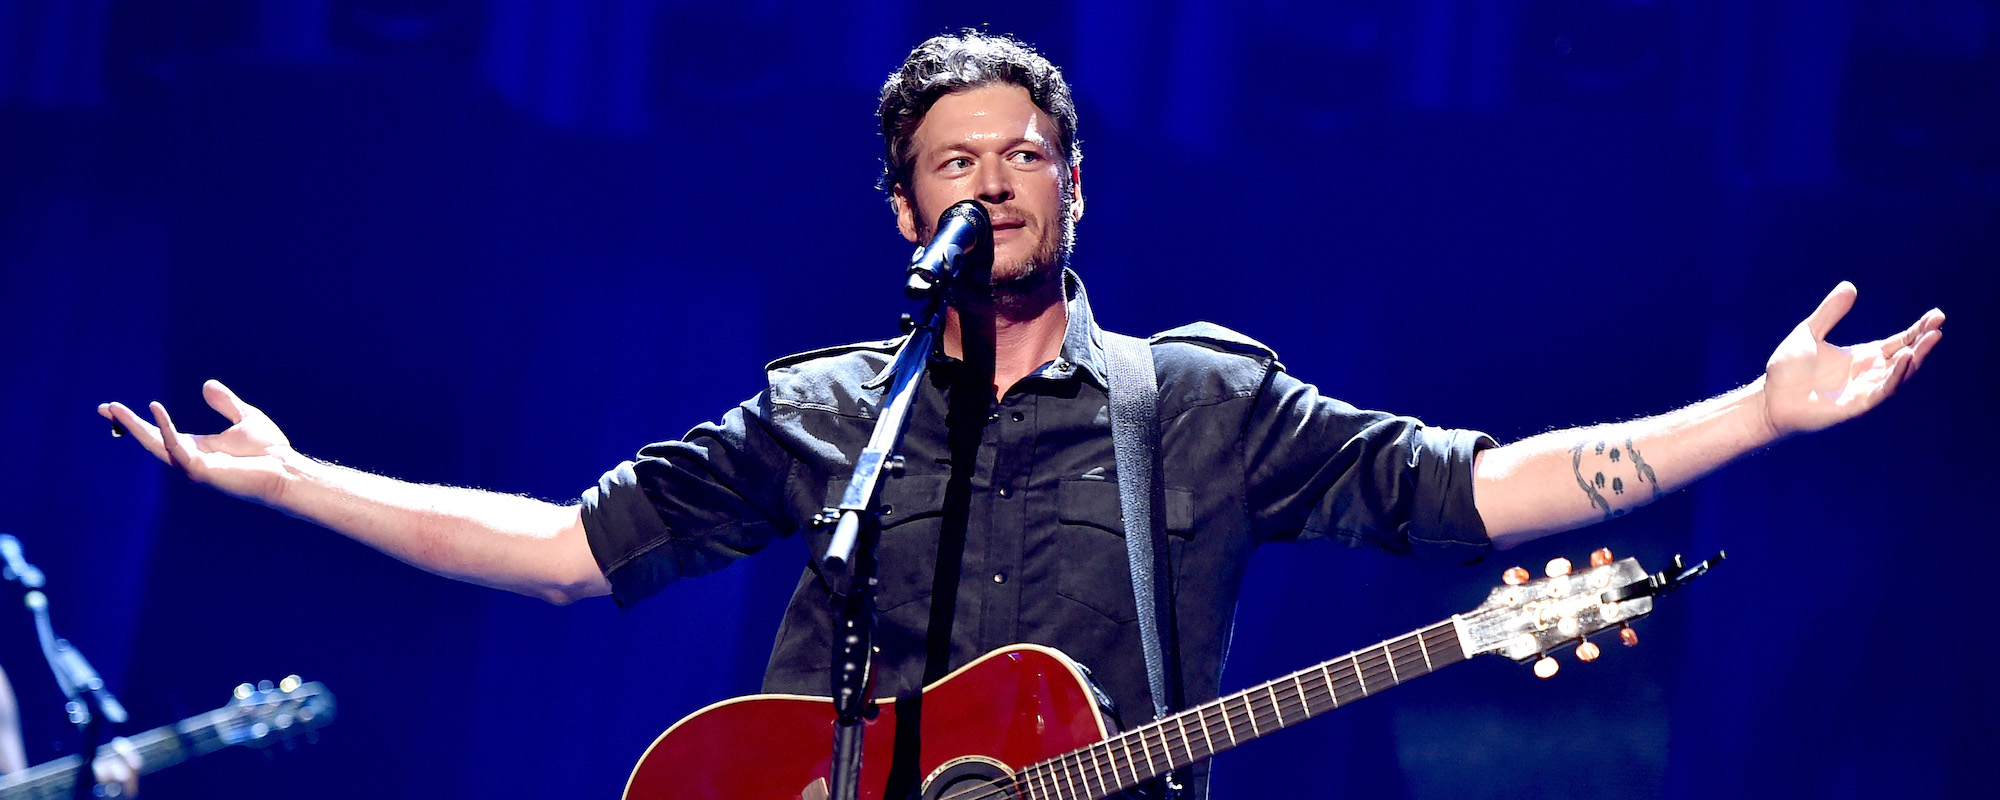 The Meaning Behind Blake Shelton’s Ode to Simple Living “Come Back as a Country Boy”